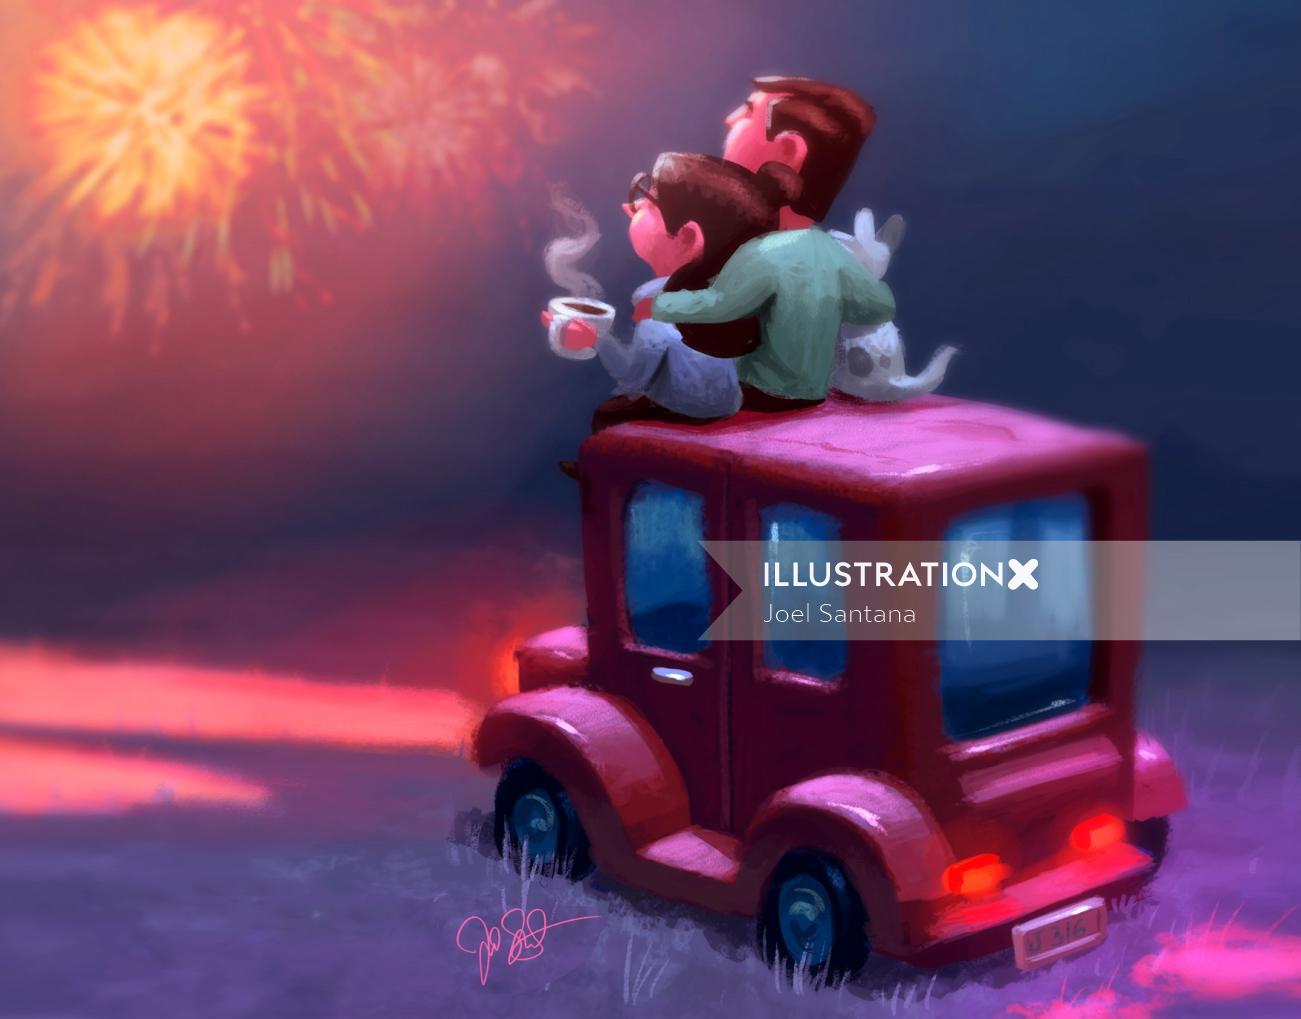 Digital painting of Happy new year